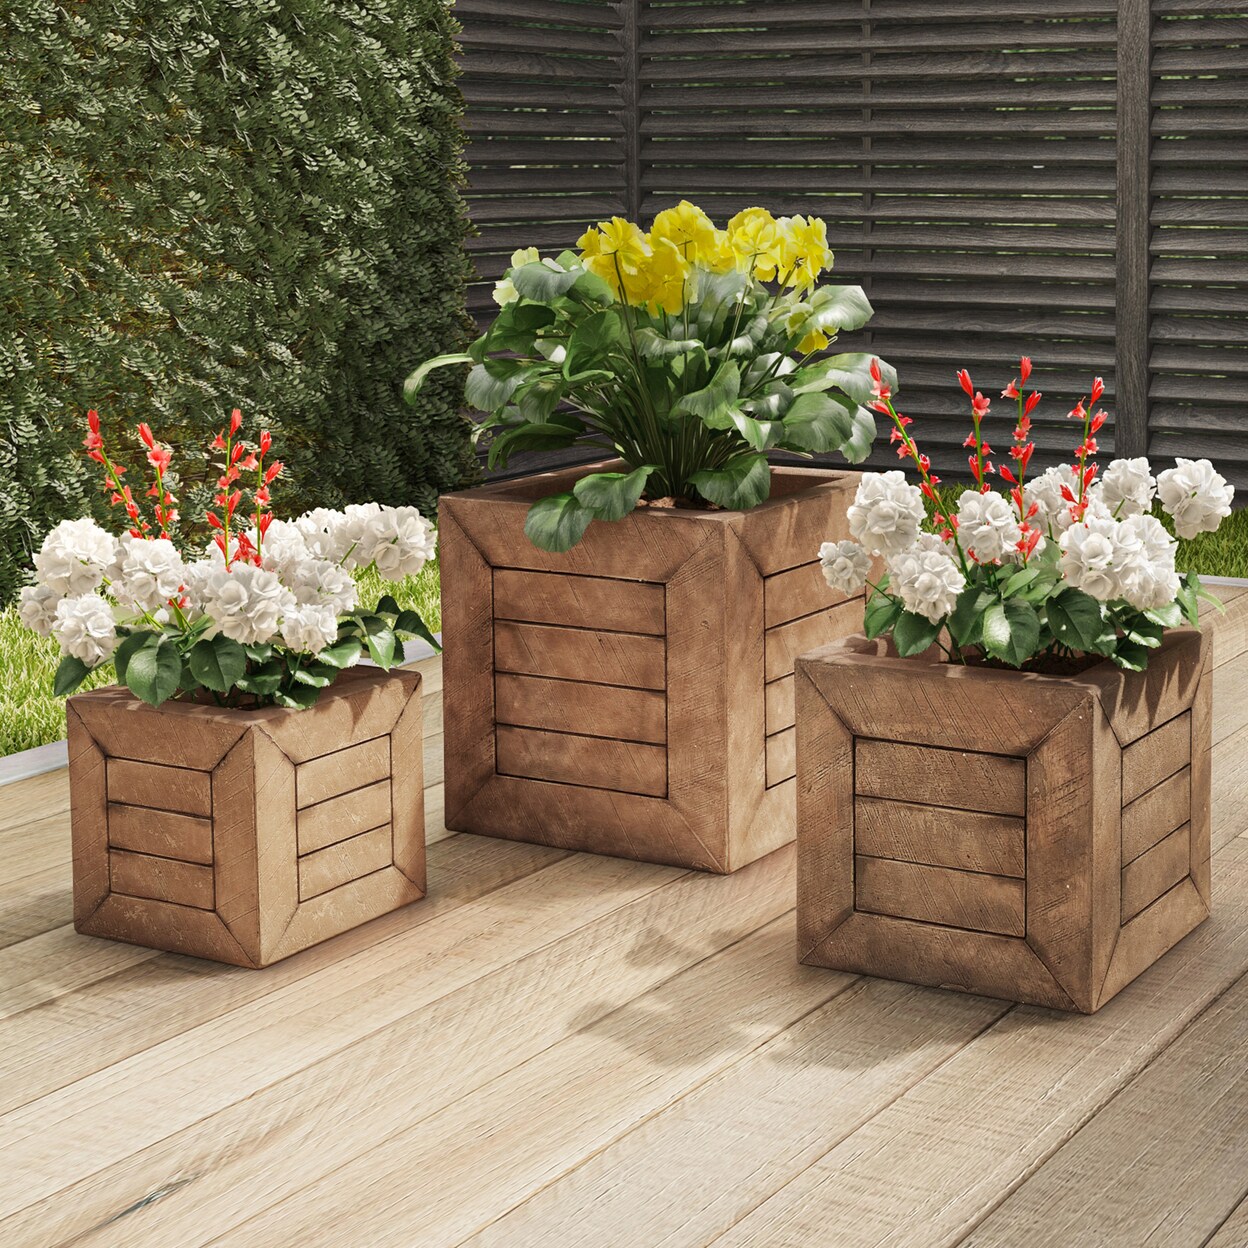 Pure Garden Square Fiber Clay Planter Set 3-Piece Varying Height Rustic Wood Look